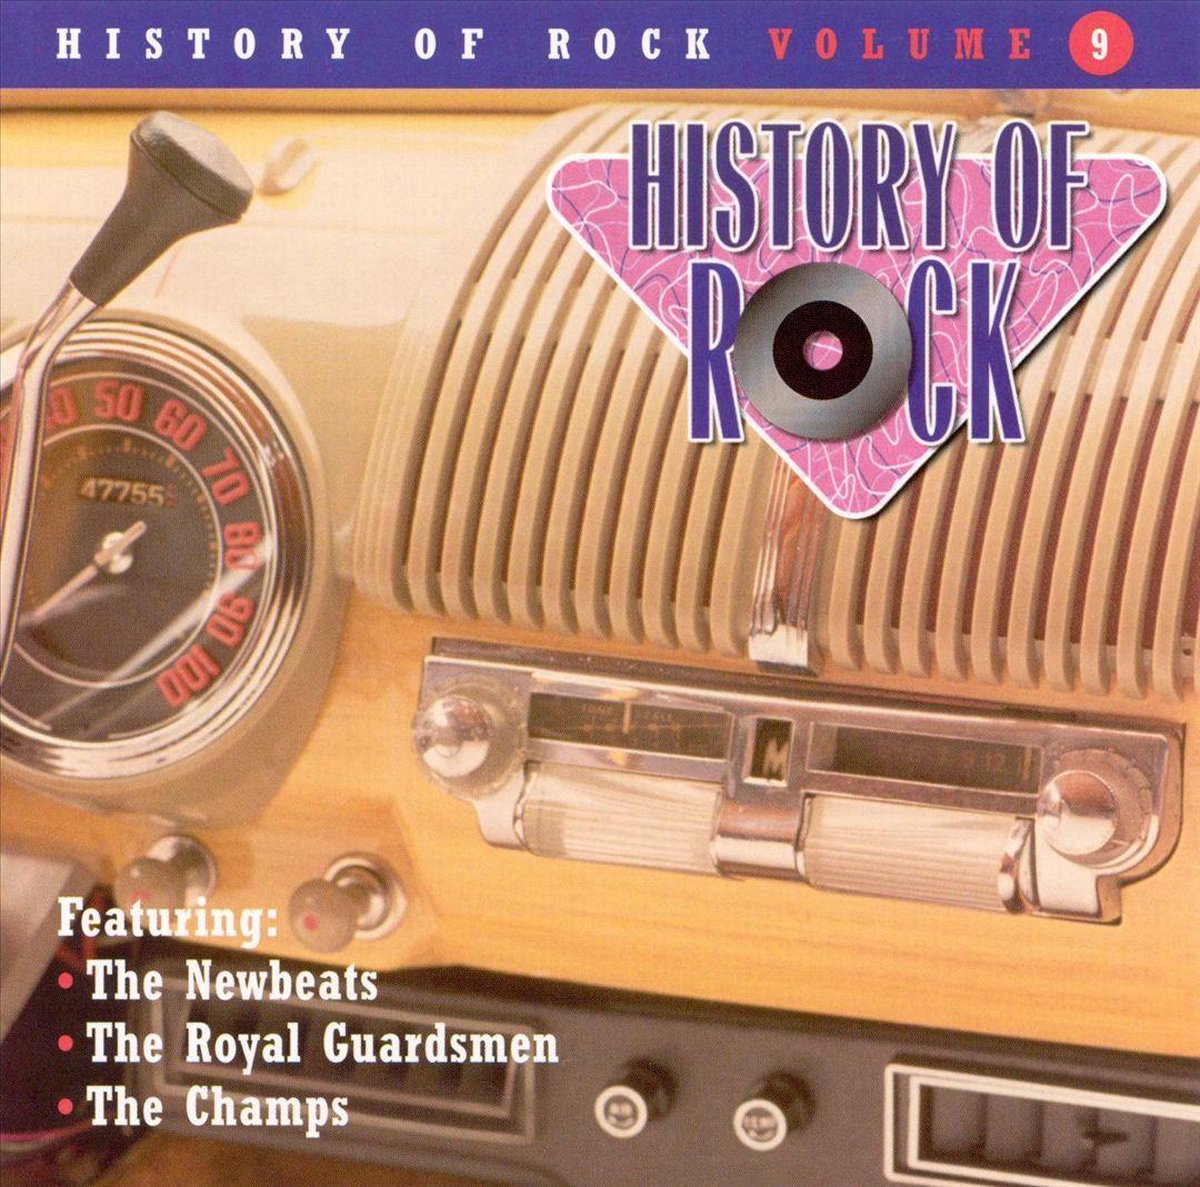 The History Of Rock Vol. 9 - various artists